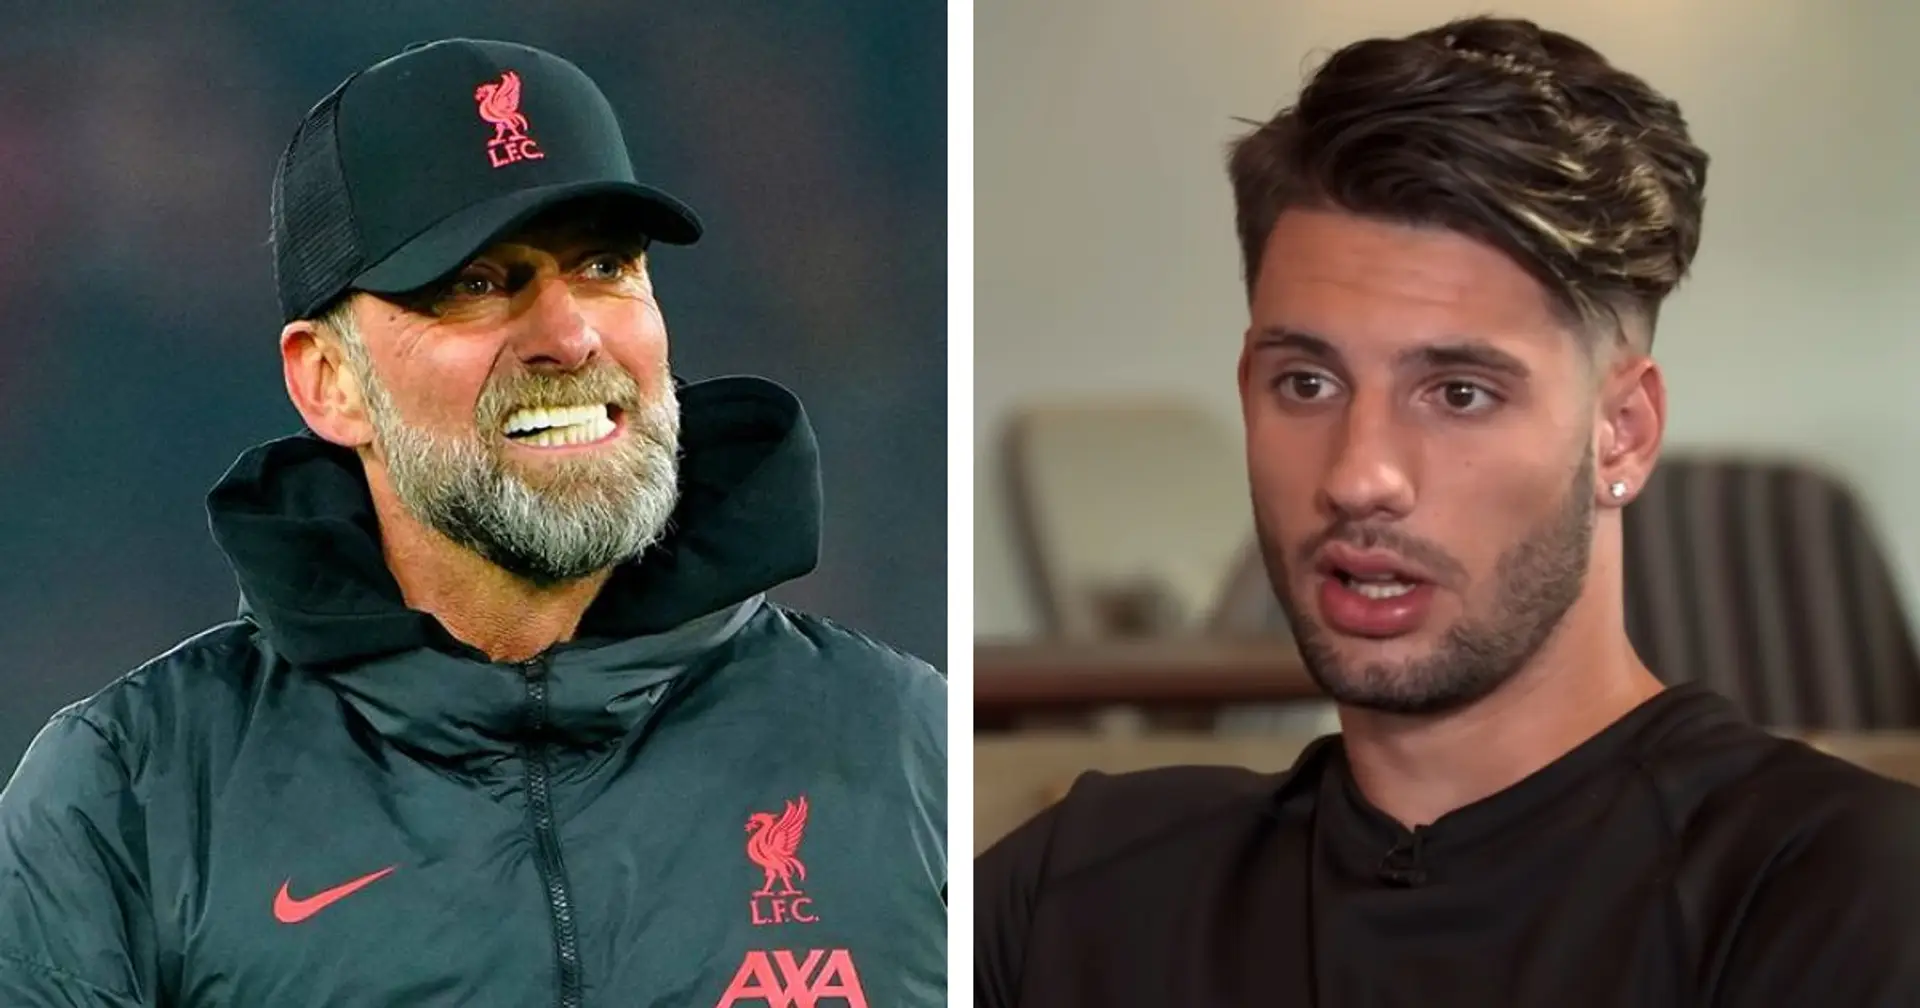 'The best manager in the world': What Liverpool target Szoboszlai has said about Klopp back in 2020